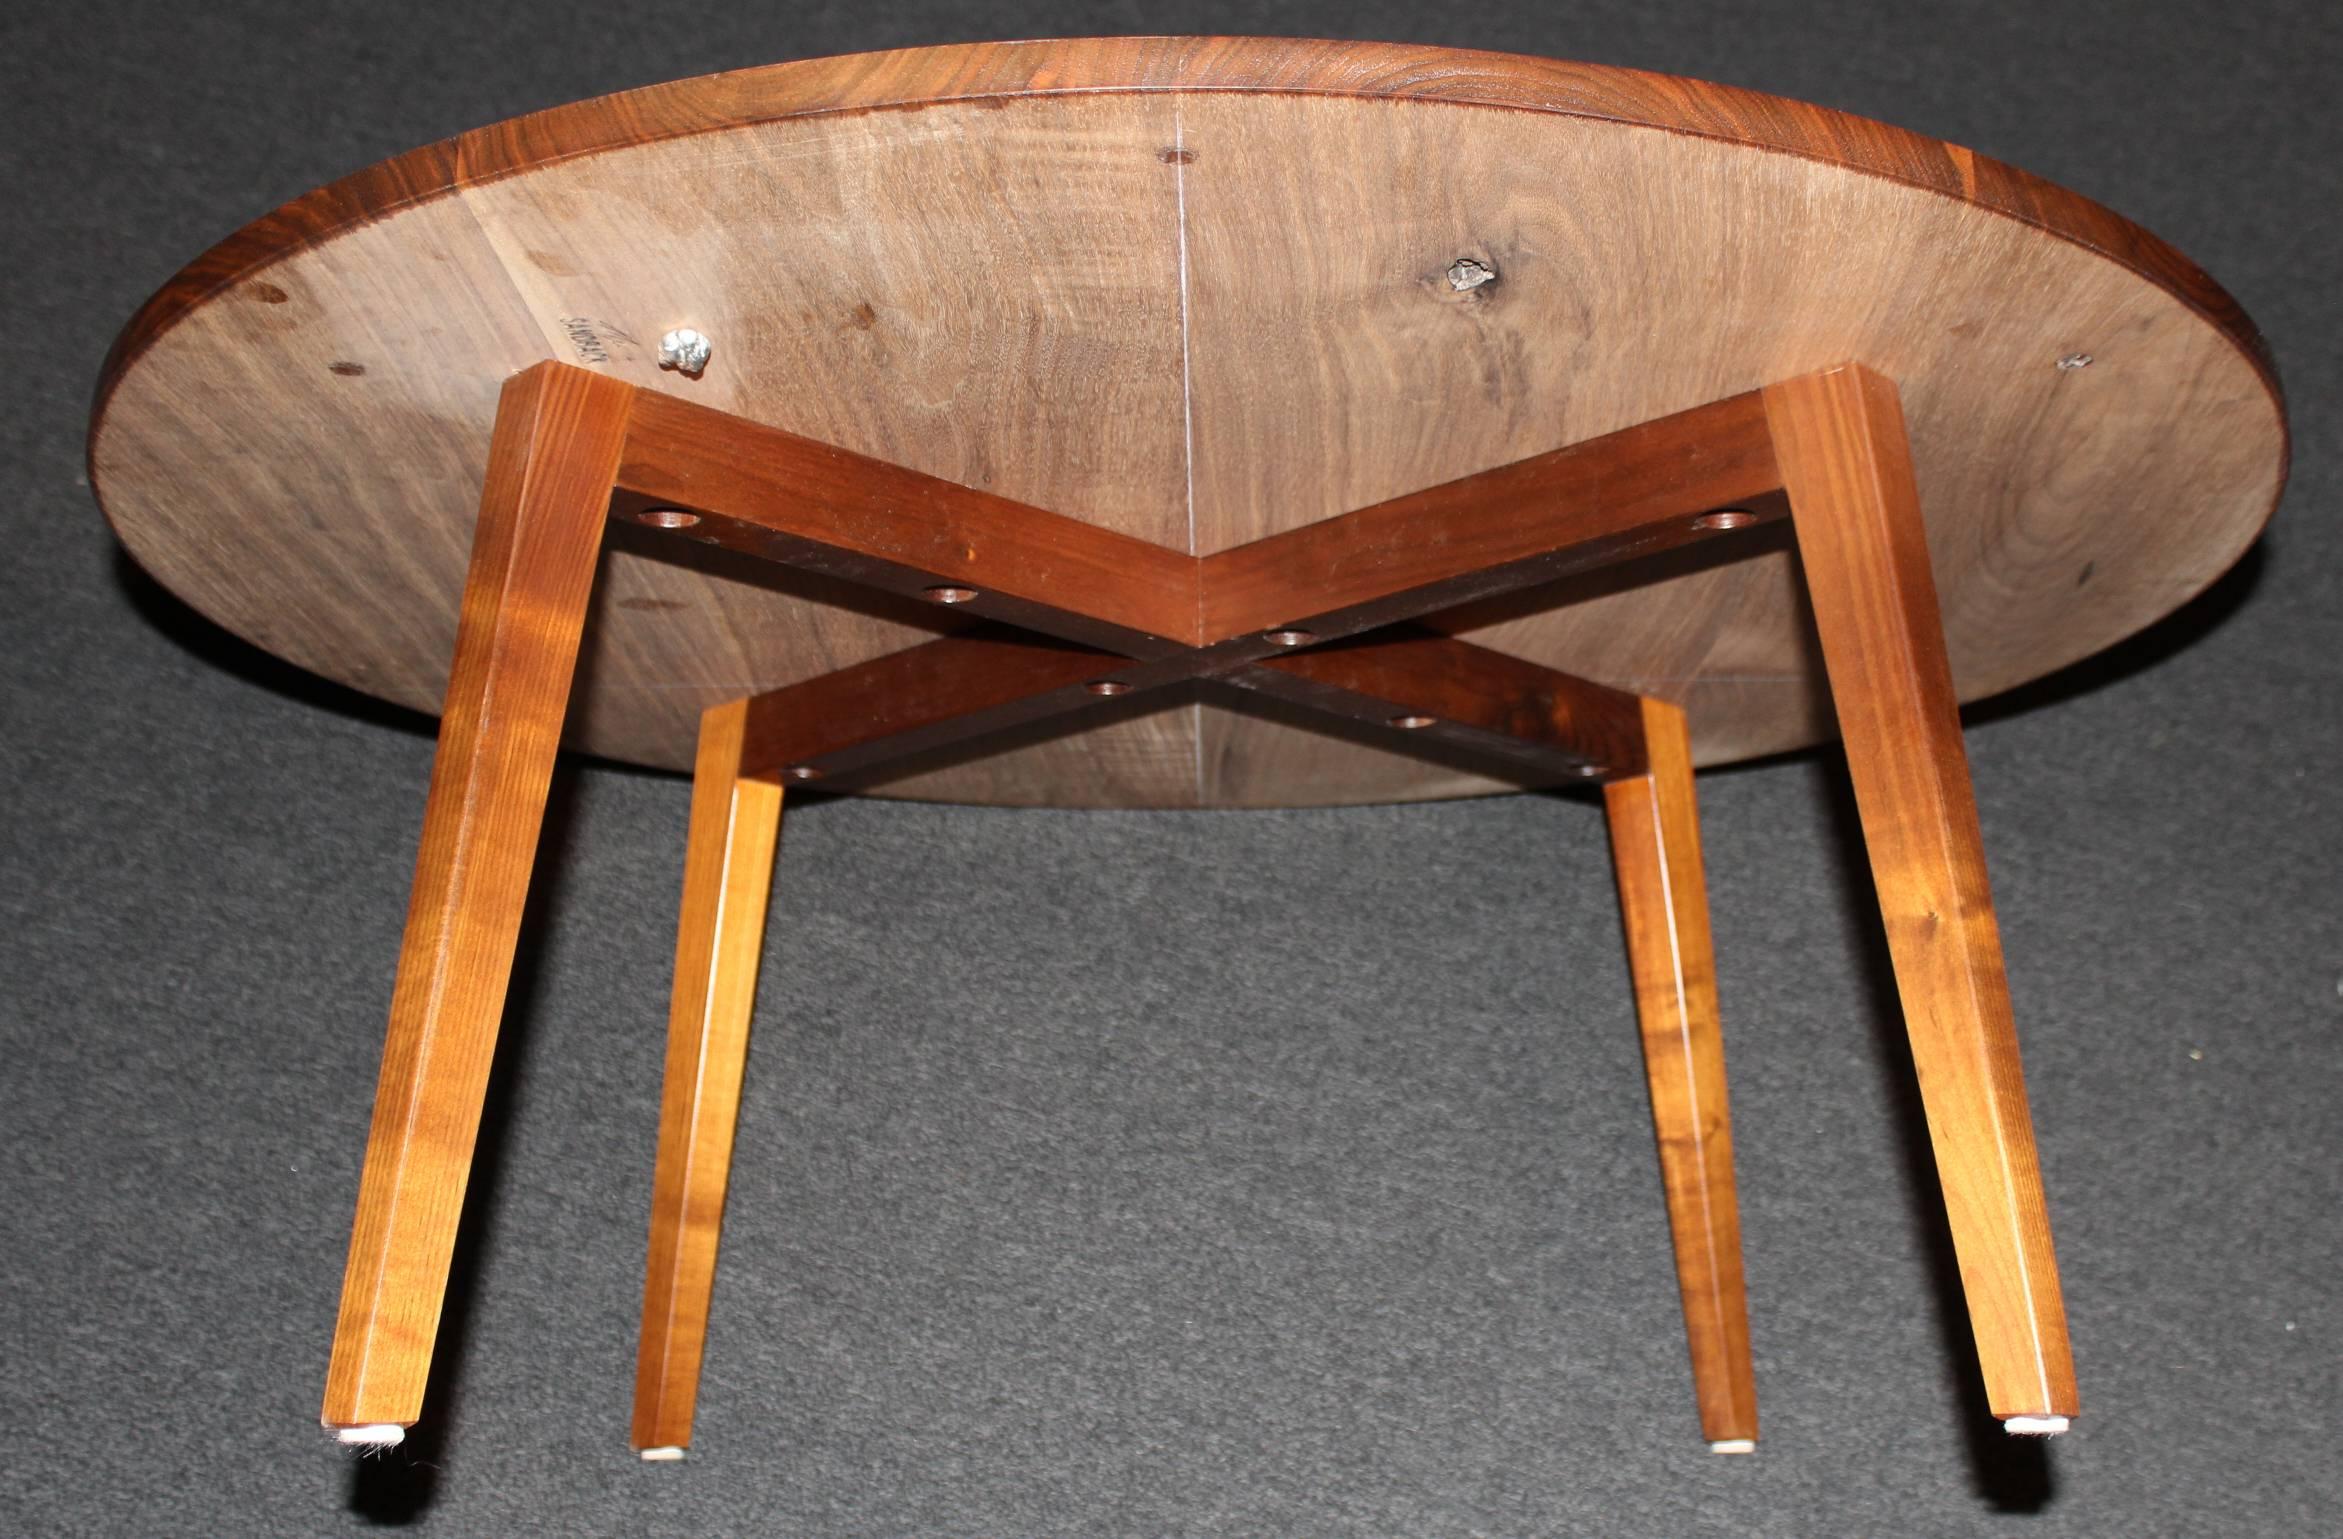 Peter Sandback Modernist Low Round Nail Table in Walnut and Maple 1